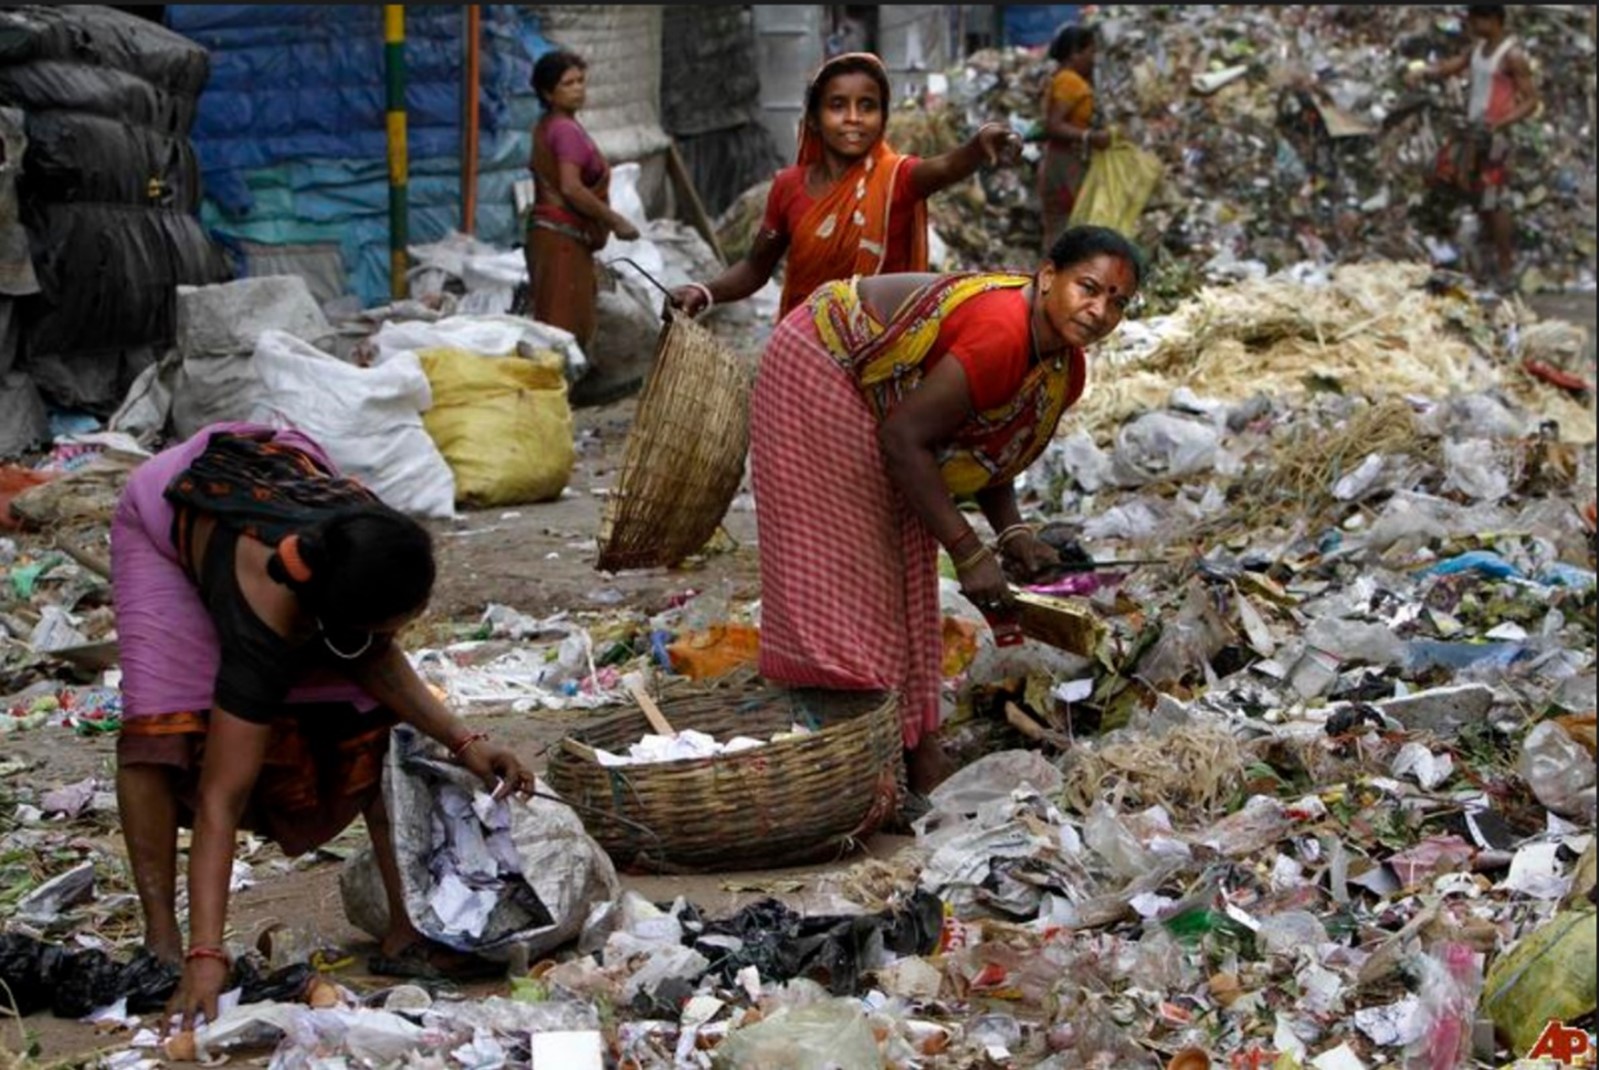 A number of women wearing saris, collecting waste in the middle of a landfill